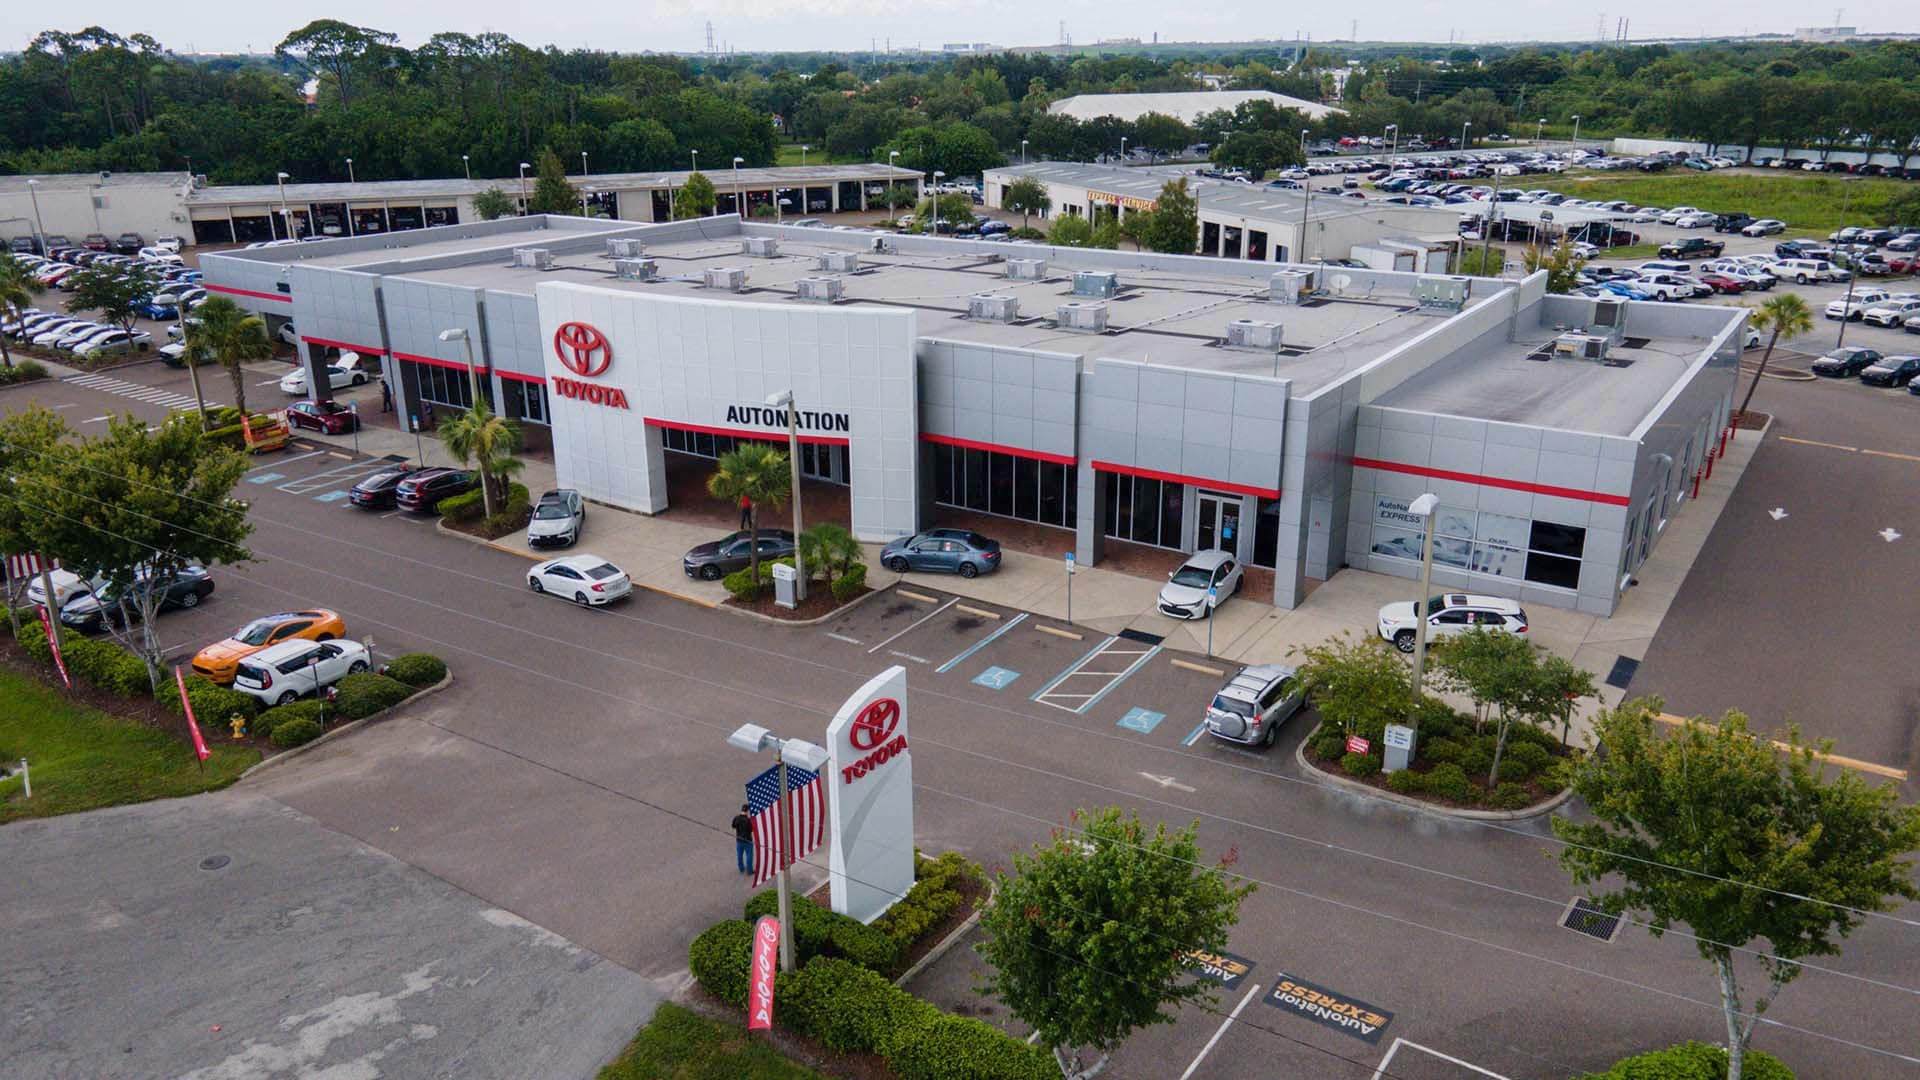 Overhead exterior view of AutoNation Toyota Pinellas Park. The building is grey and white and has some large windows. Many vehicles are seen parked in rows near the building, which also has some trees nearby.